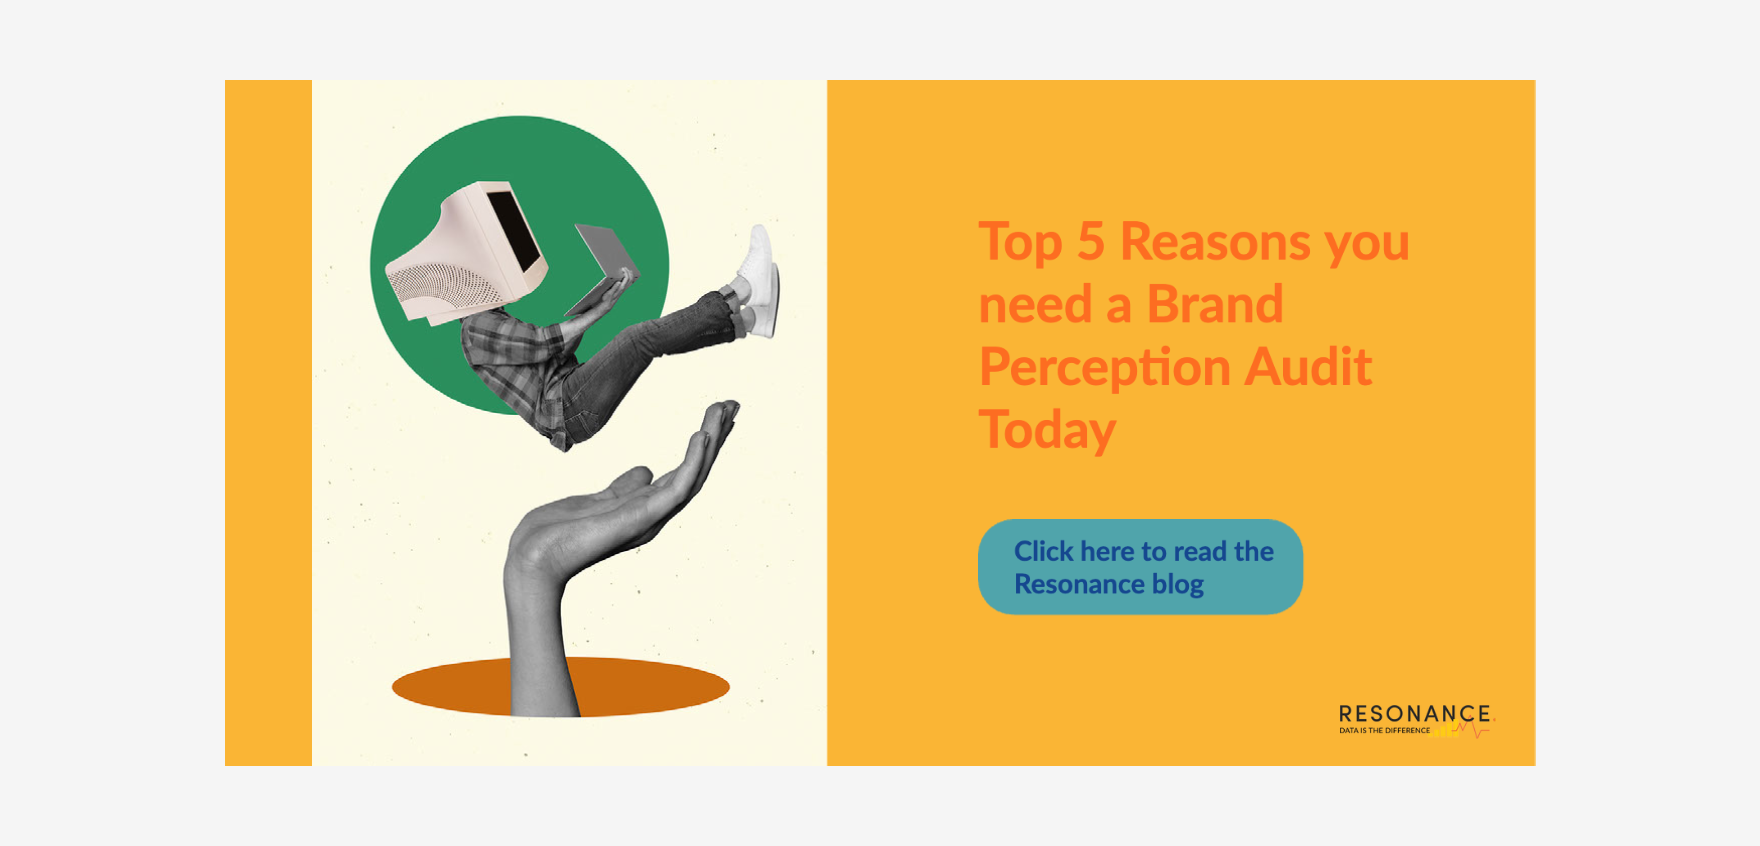 Top 5 Reasons you need a Brand Perception Audit today